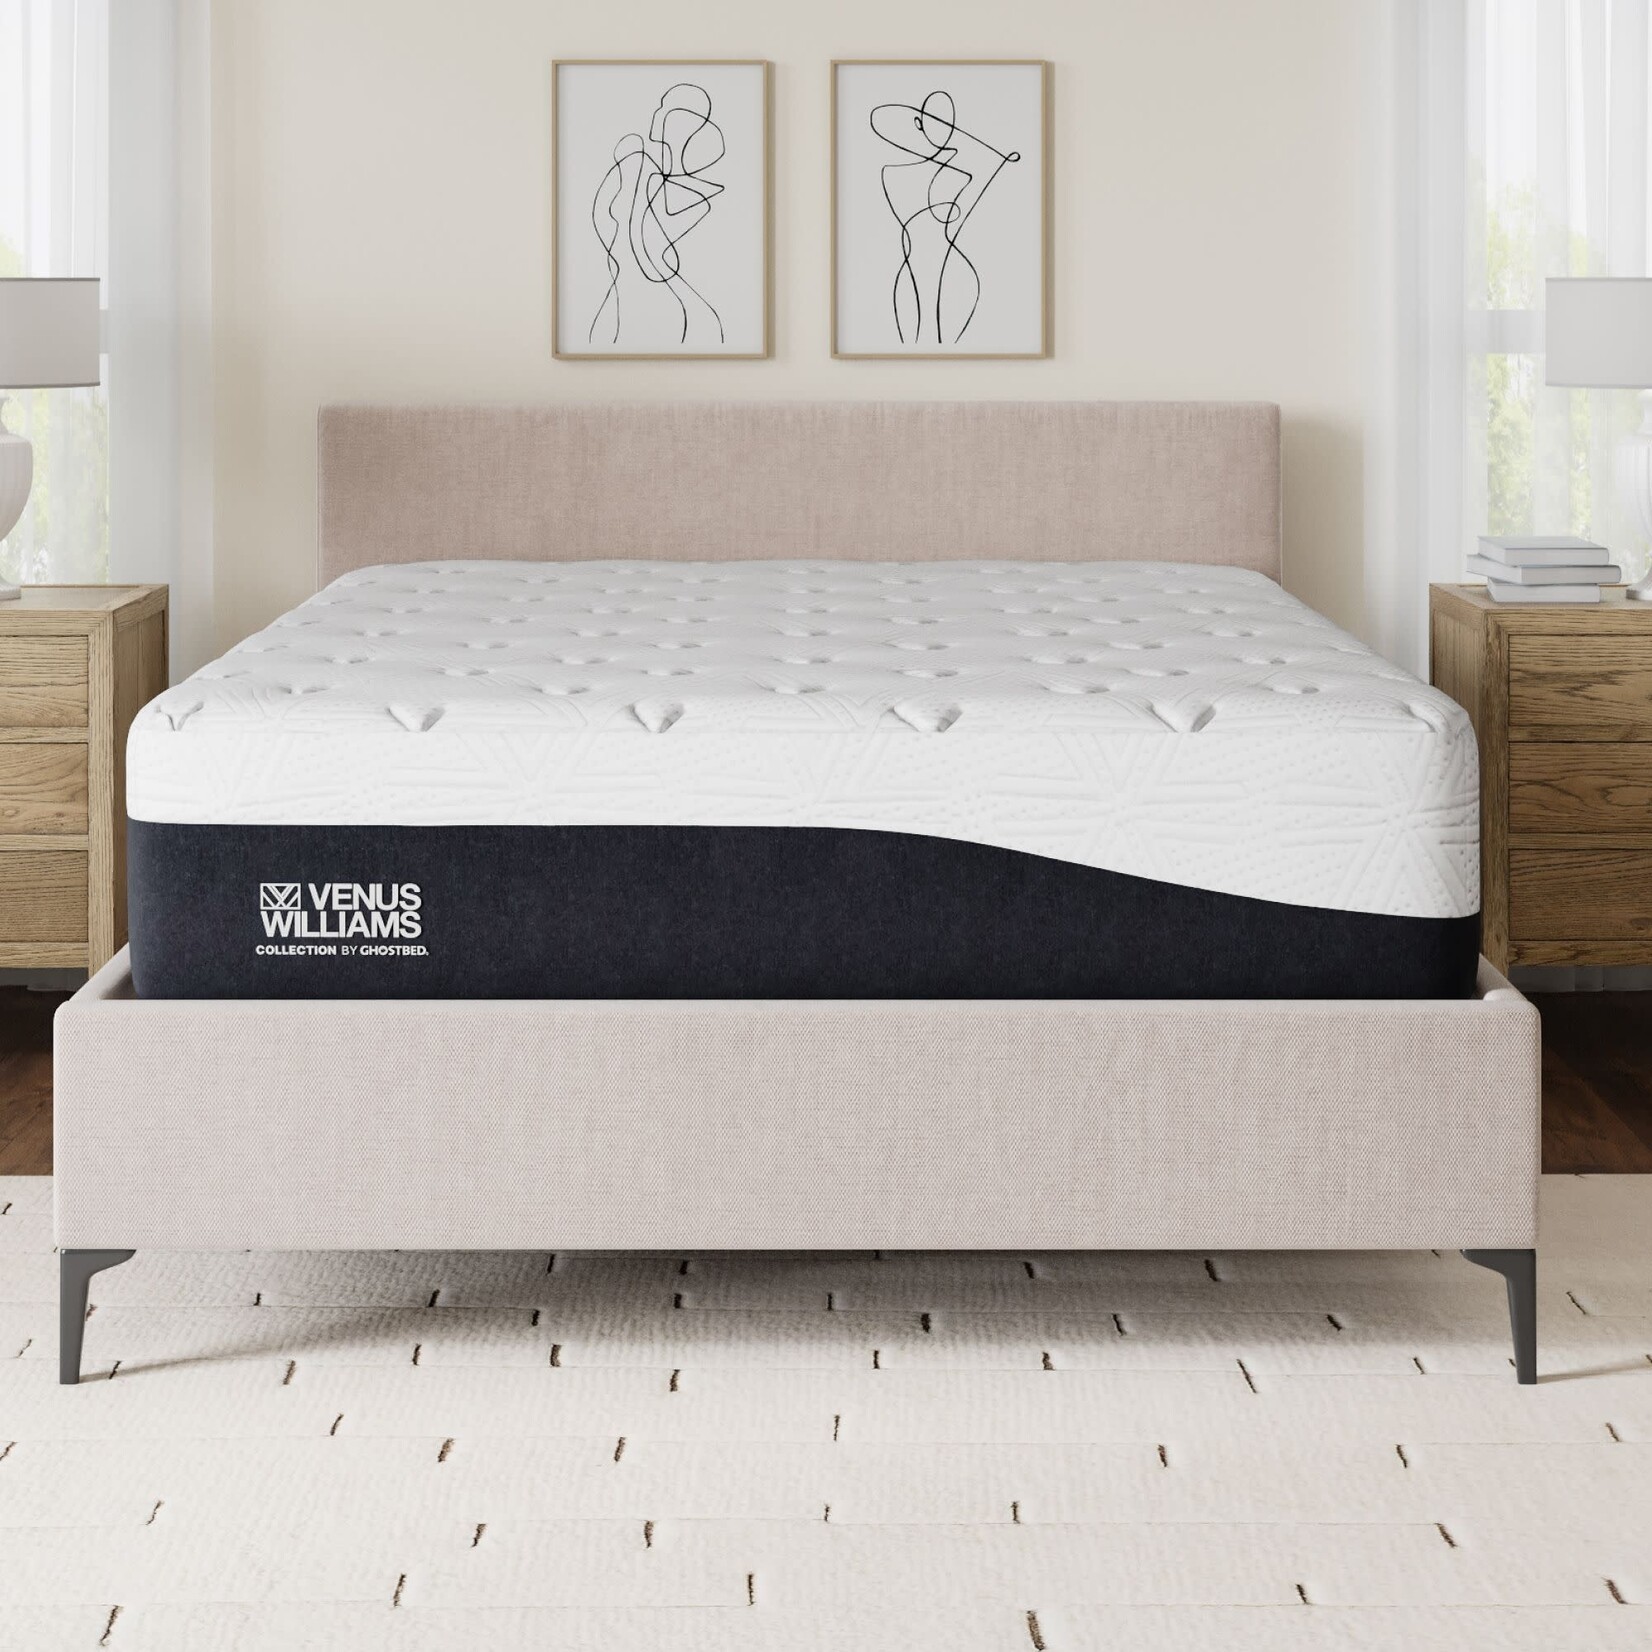 GHOSTBED VENUS WILLIAMS COLLECTION BY GHOSTBED - SERVE HYBRID 14"